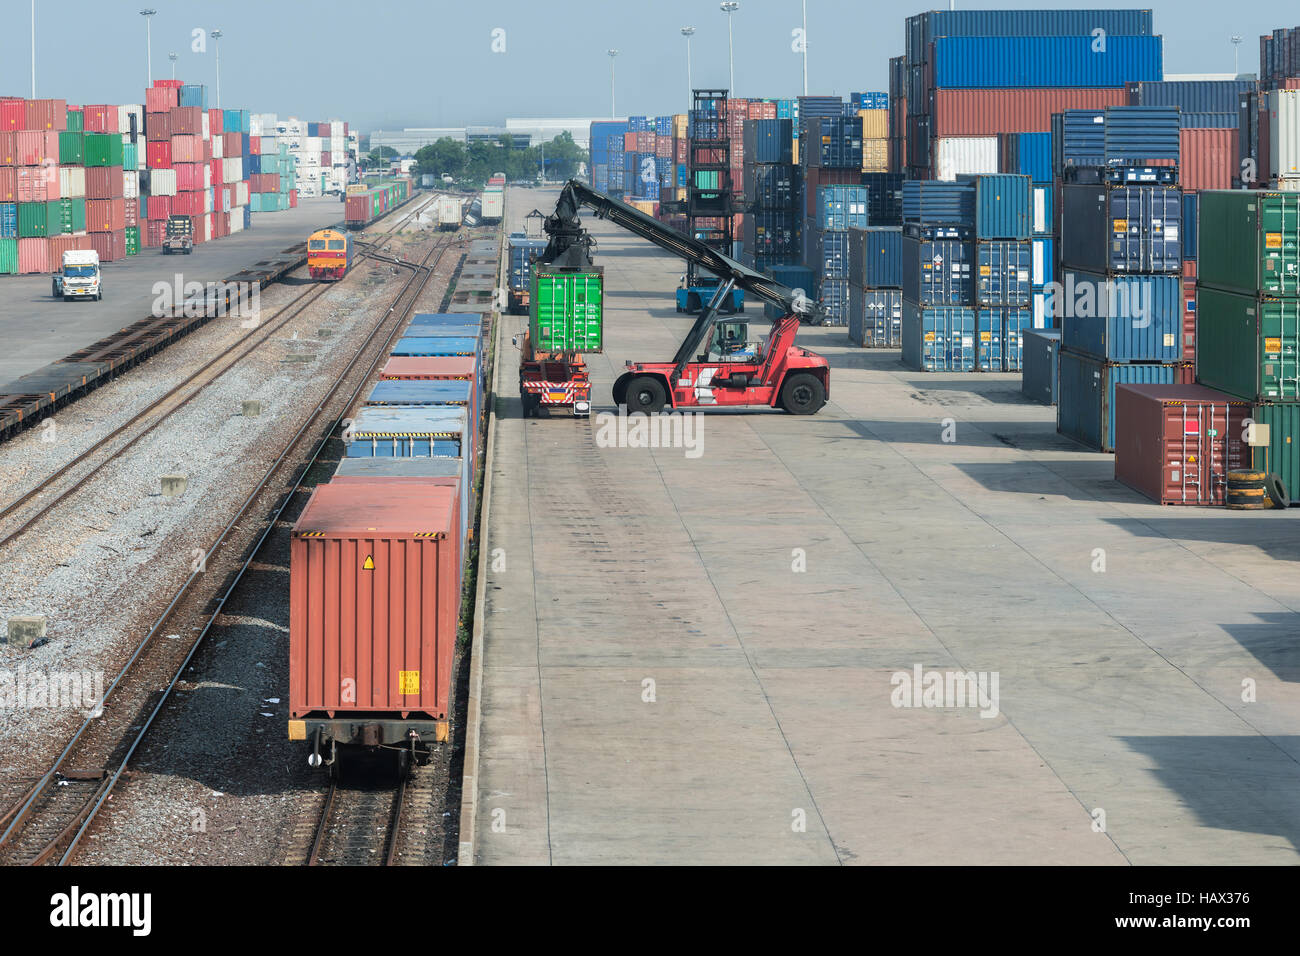 Cargo train platform with freight train container at depot in port use for export logistics background Stock Photo